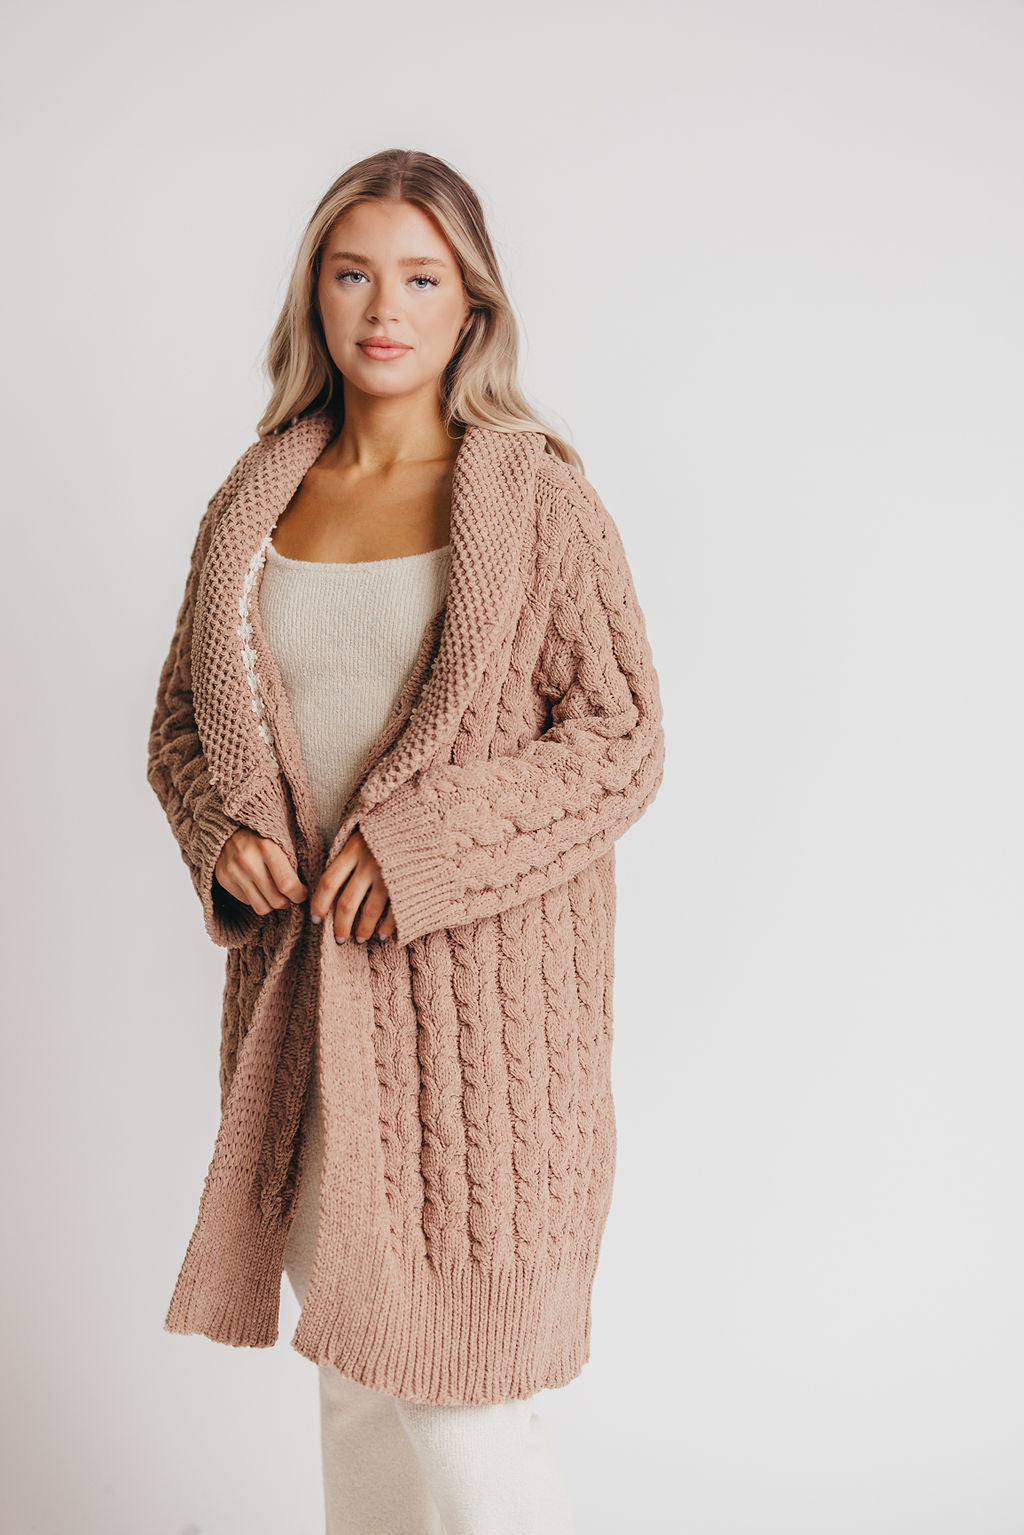 Presley Open Front Cable Knit Cardigan in Camel